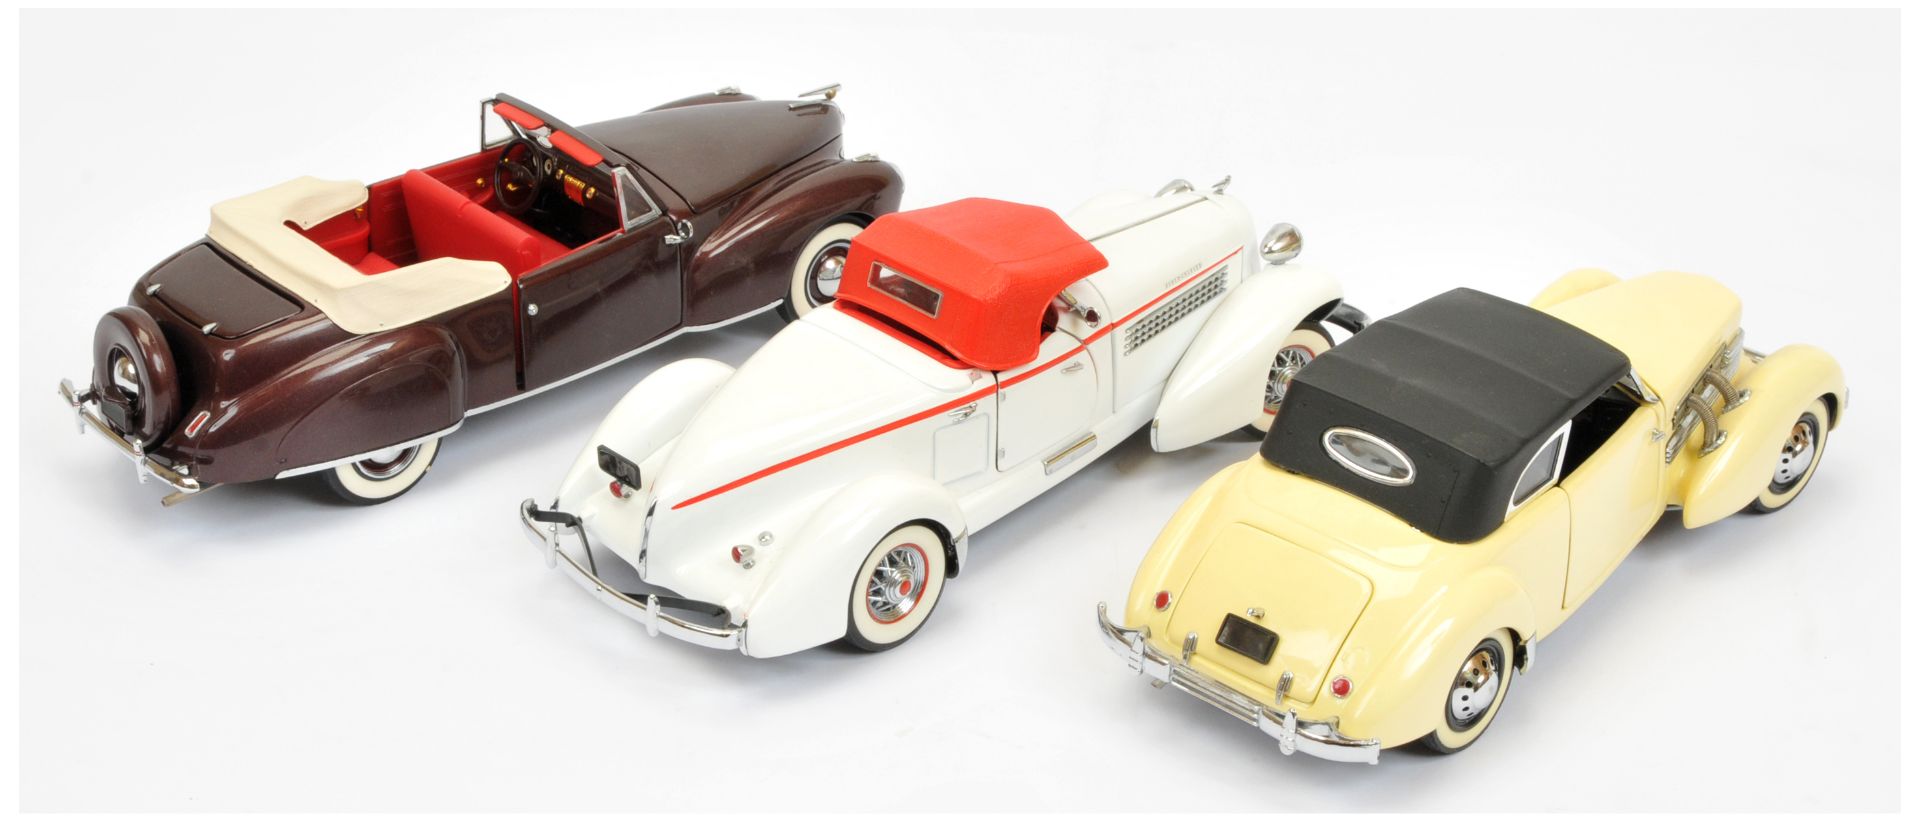 Franklin Mint a boxed group of model cars comprising of (1) B11PT92 1935 Auburn 851 - white, (2) ... - Image 2 of 2